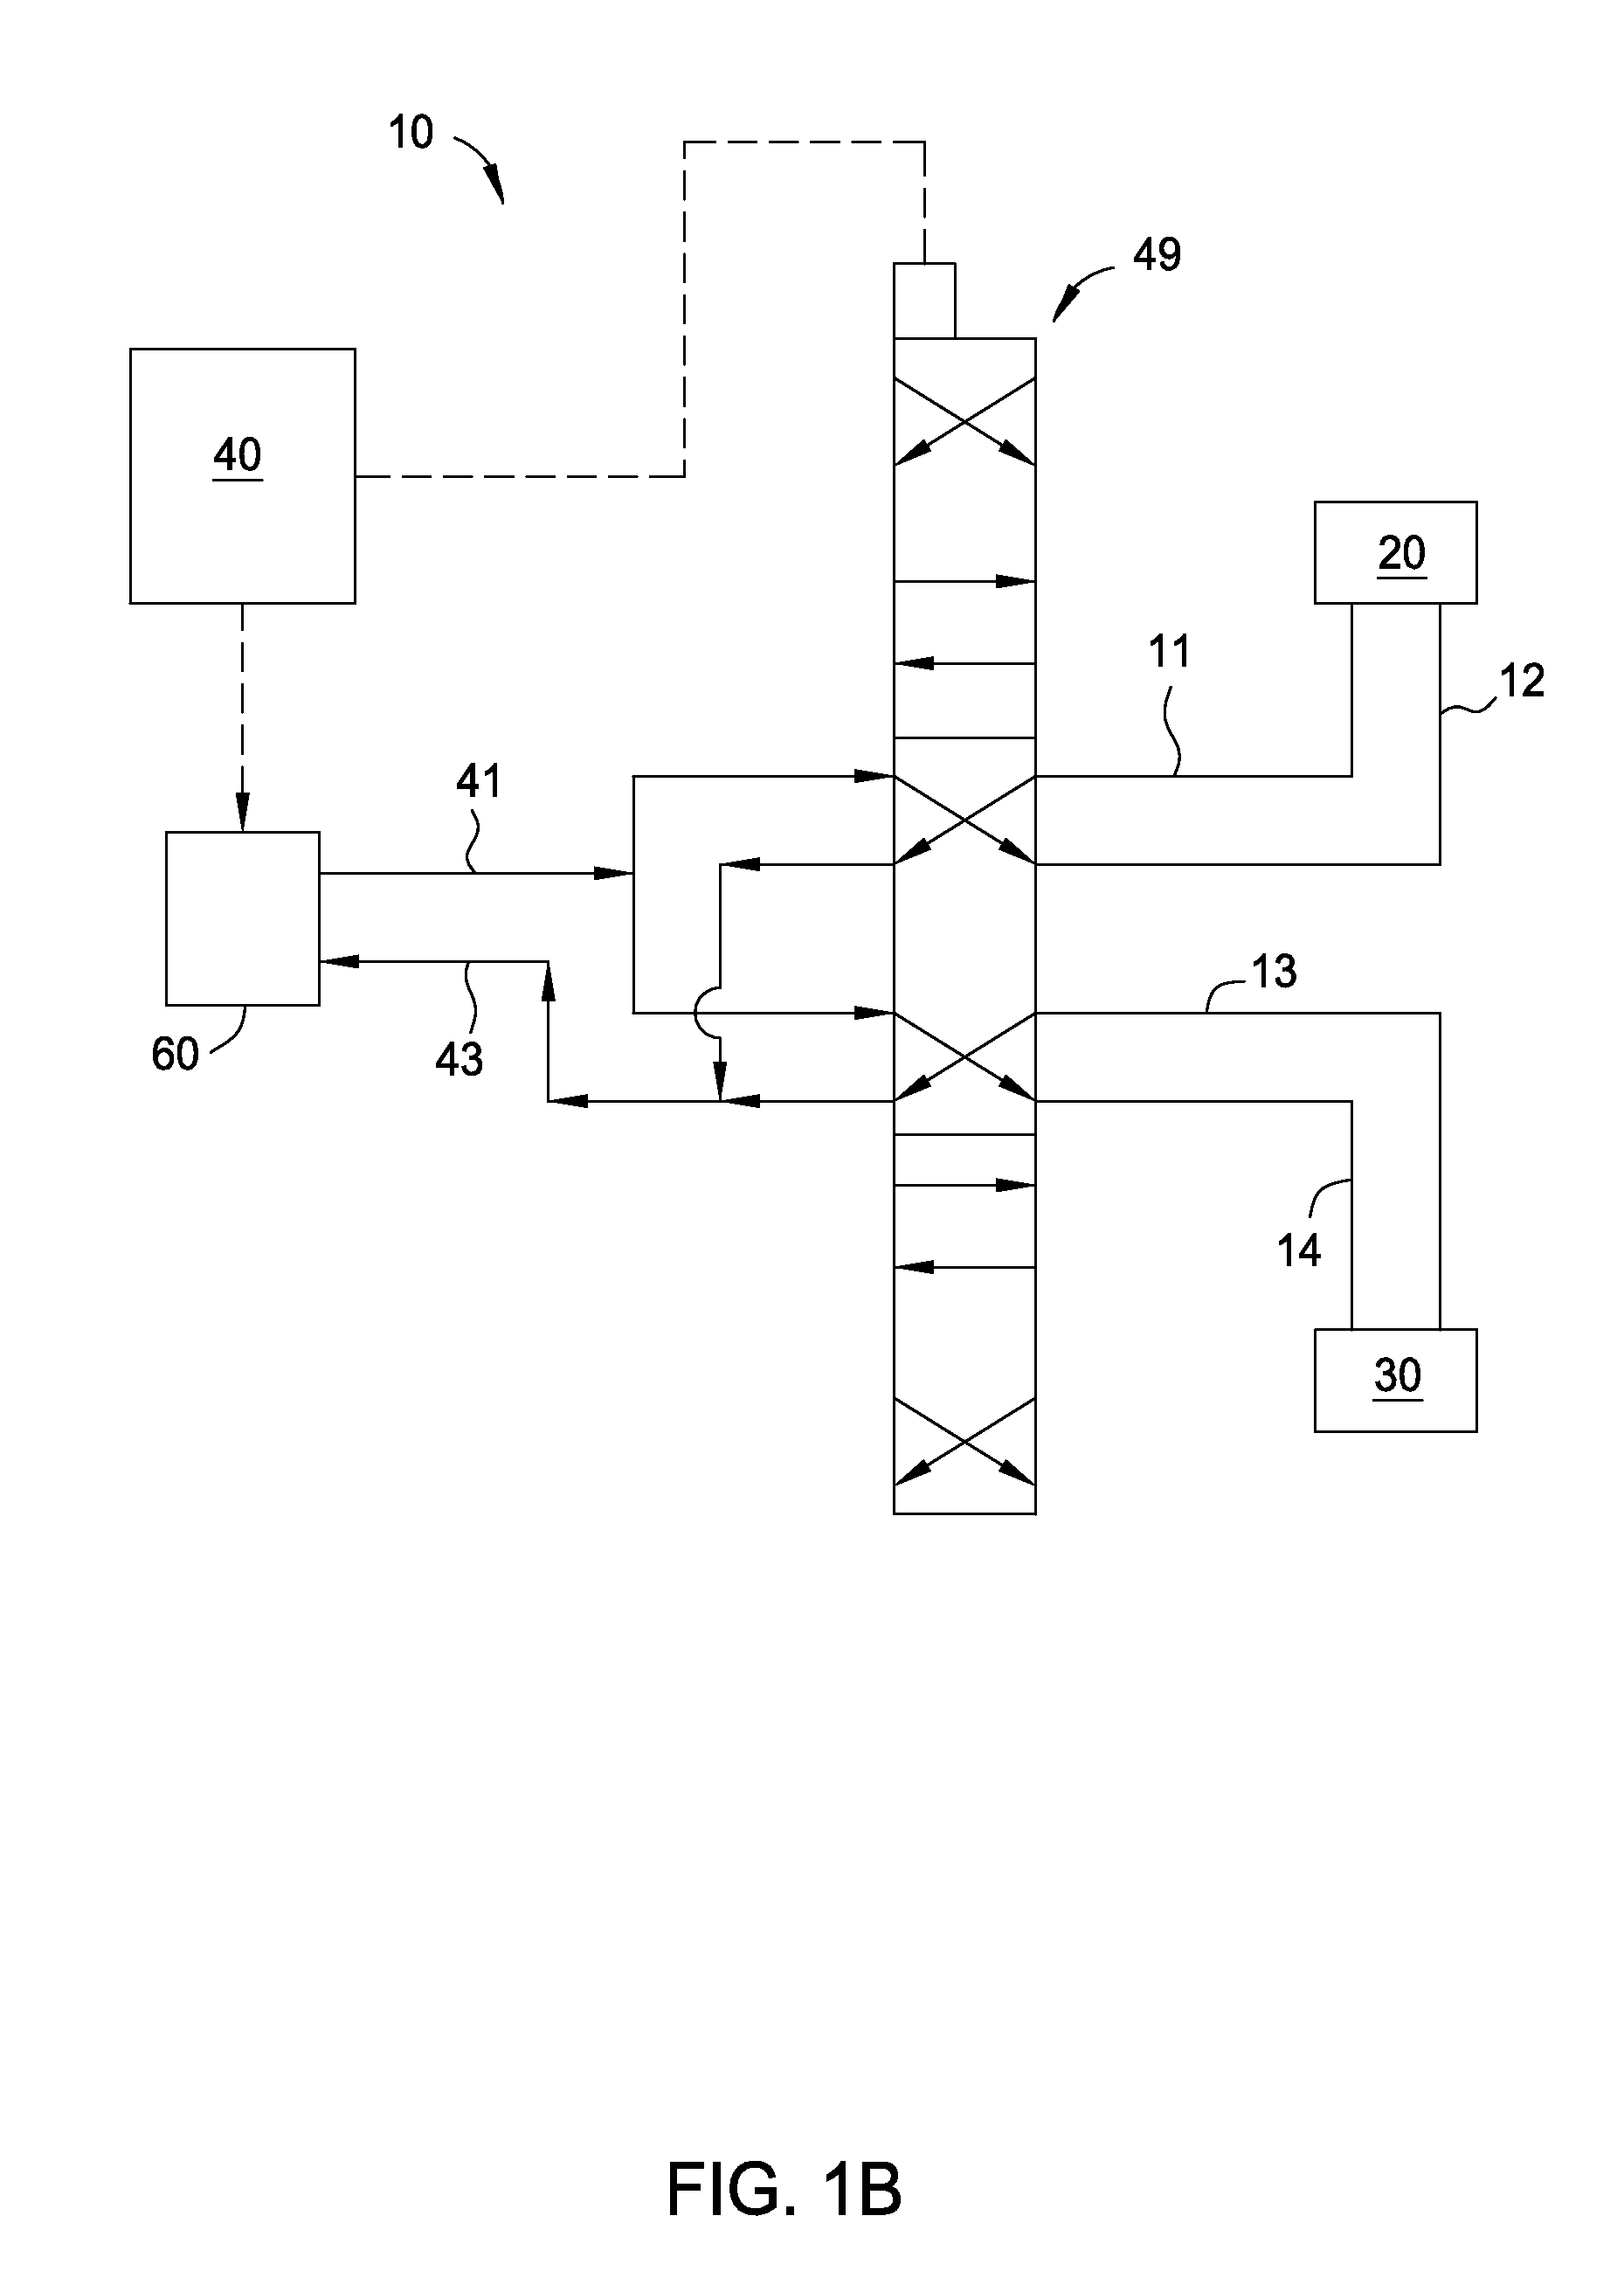 Electronic control system for a tubular handling tool